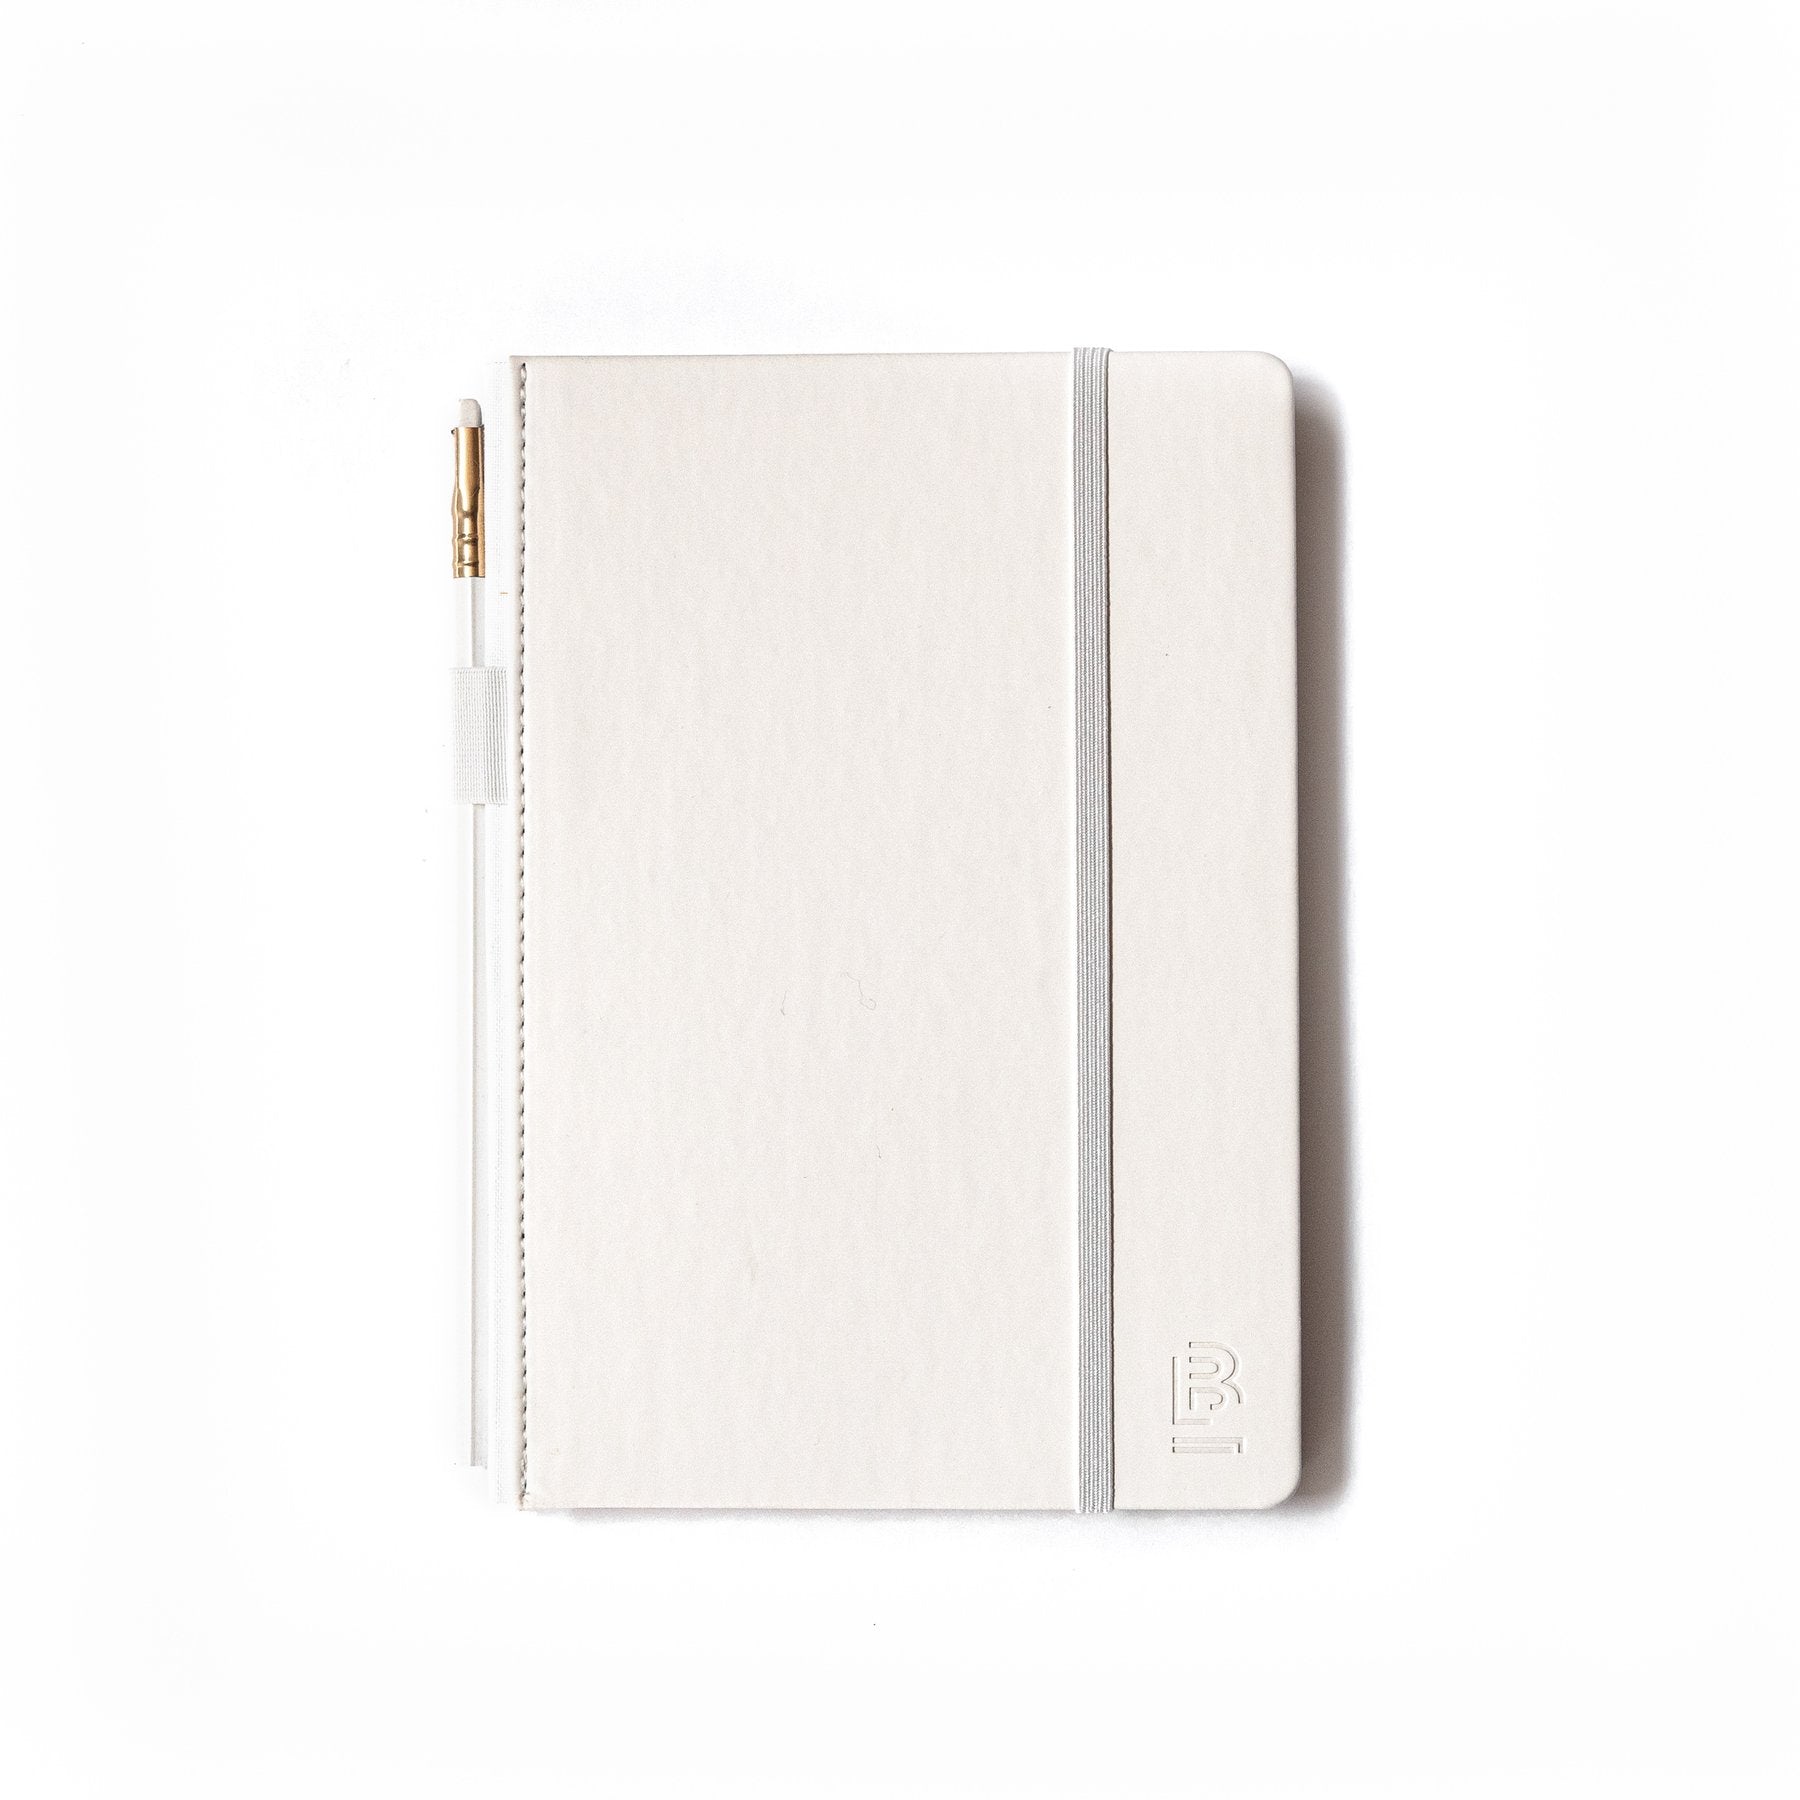 Blackwing Lay-Flat Notebook in White